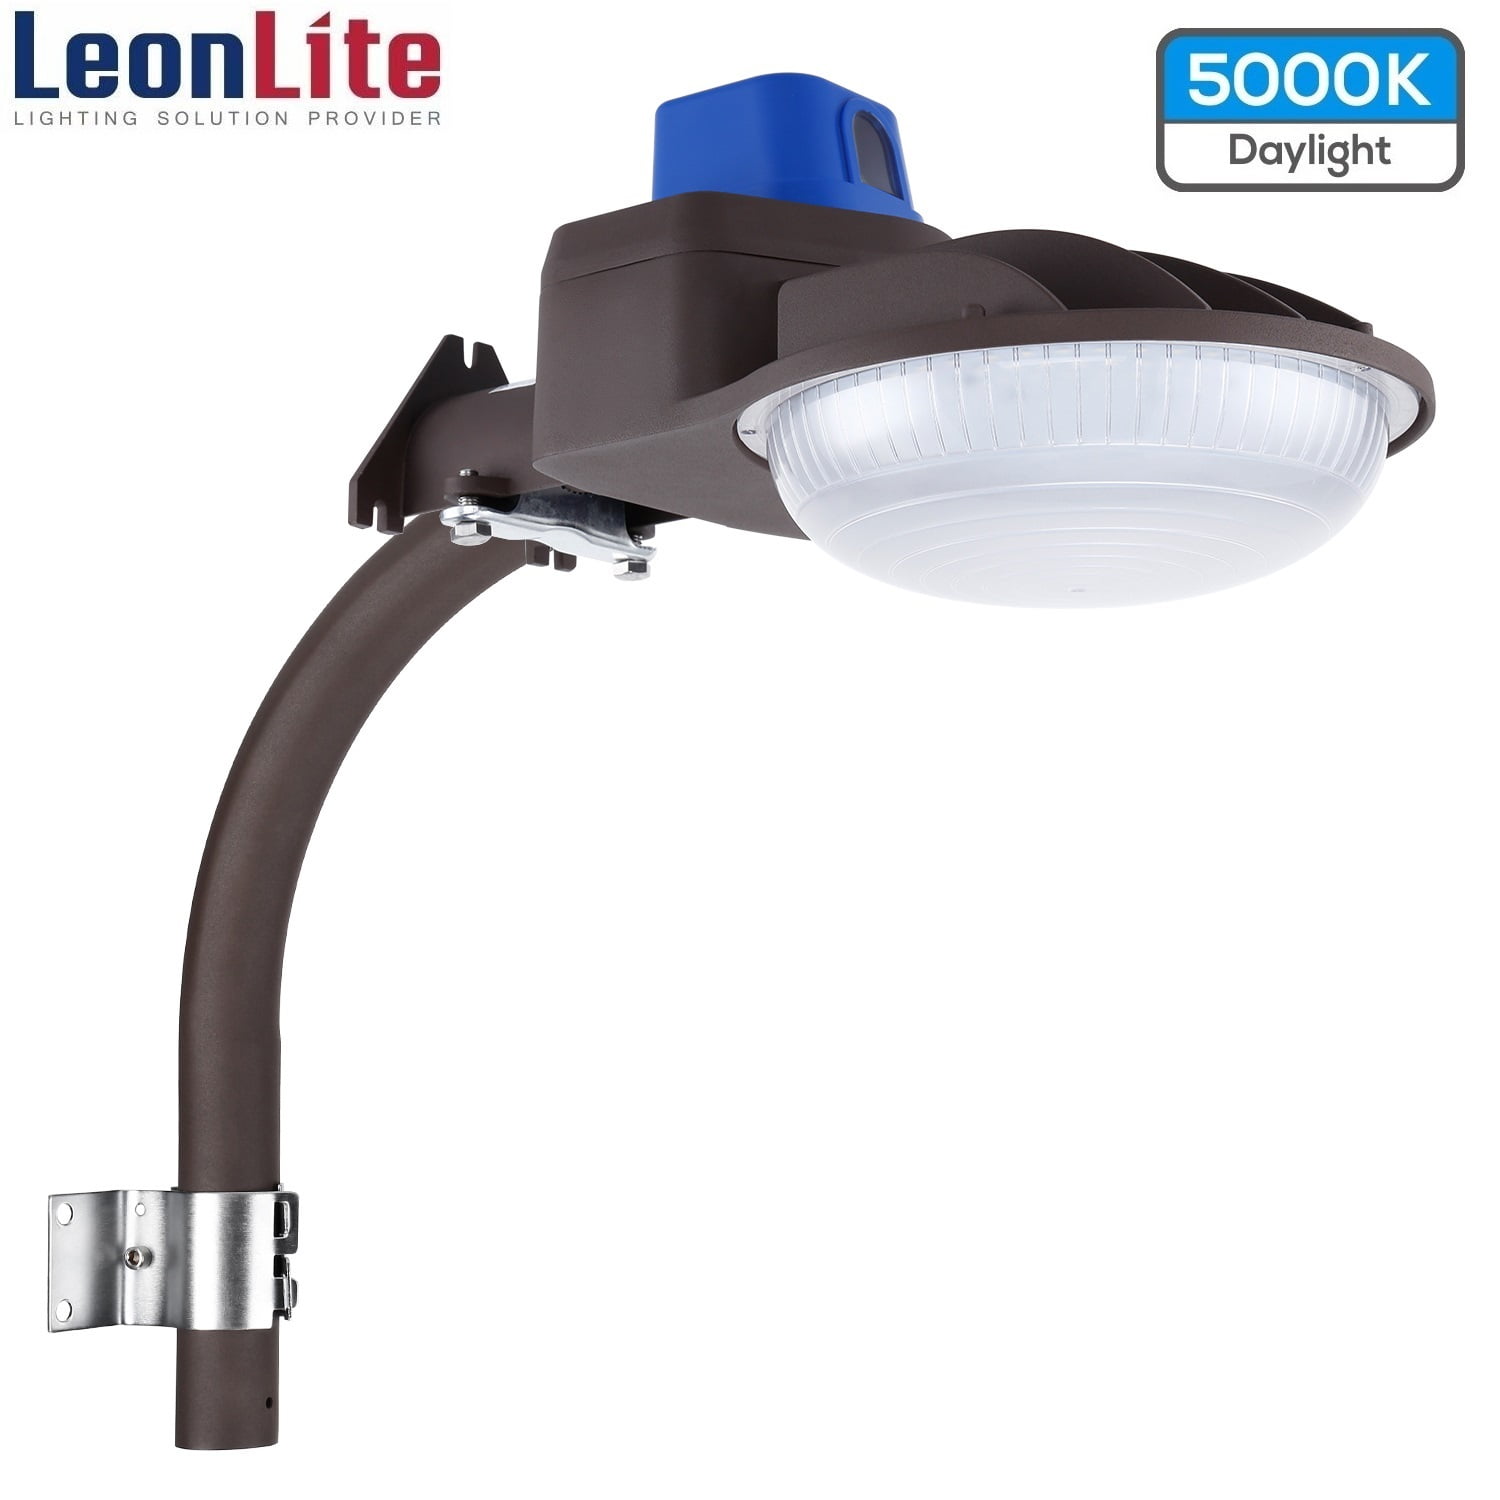 5-Year Warranty IP65 Waterproof 5850lm 5000K for Warehouse 420W Eqv. 45W Backyard UL & DLC Listed Dimmable Outdoor Commercial Area Lighting Garage LEONLITE LED Full Cutoff Wall Pack Factory 